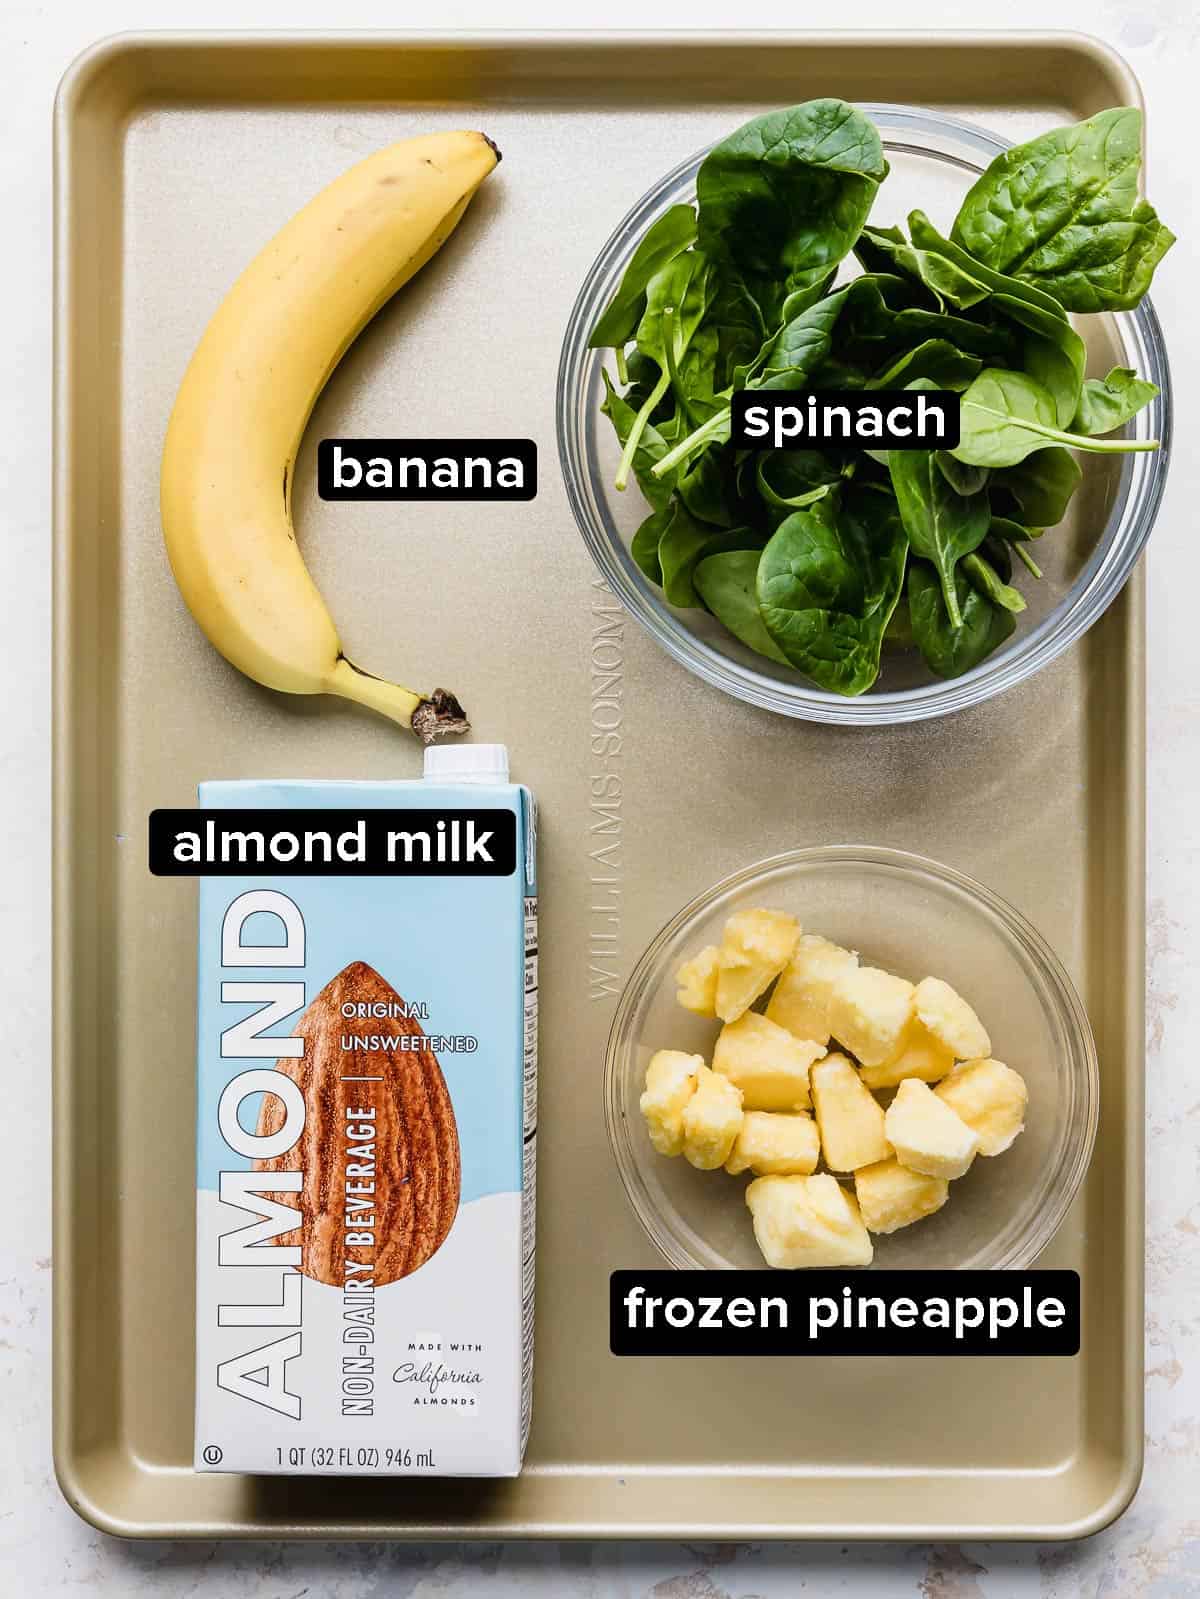 Ingredients used to make Pineapple Spinach Smoothie on a bronze baking sheet (banana, spinach, pineapple, almond milk).